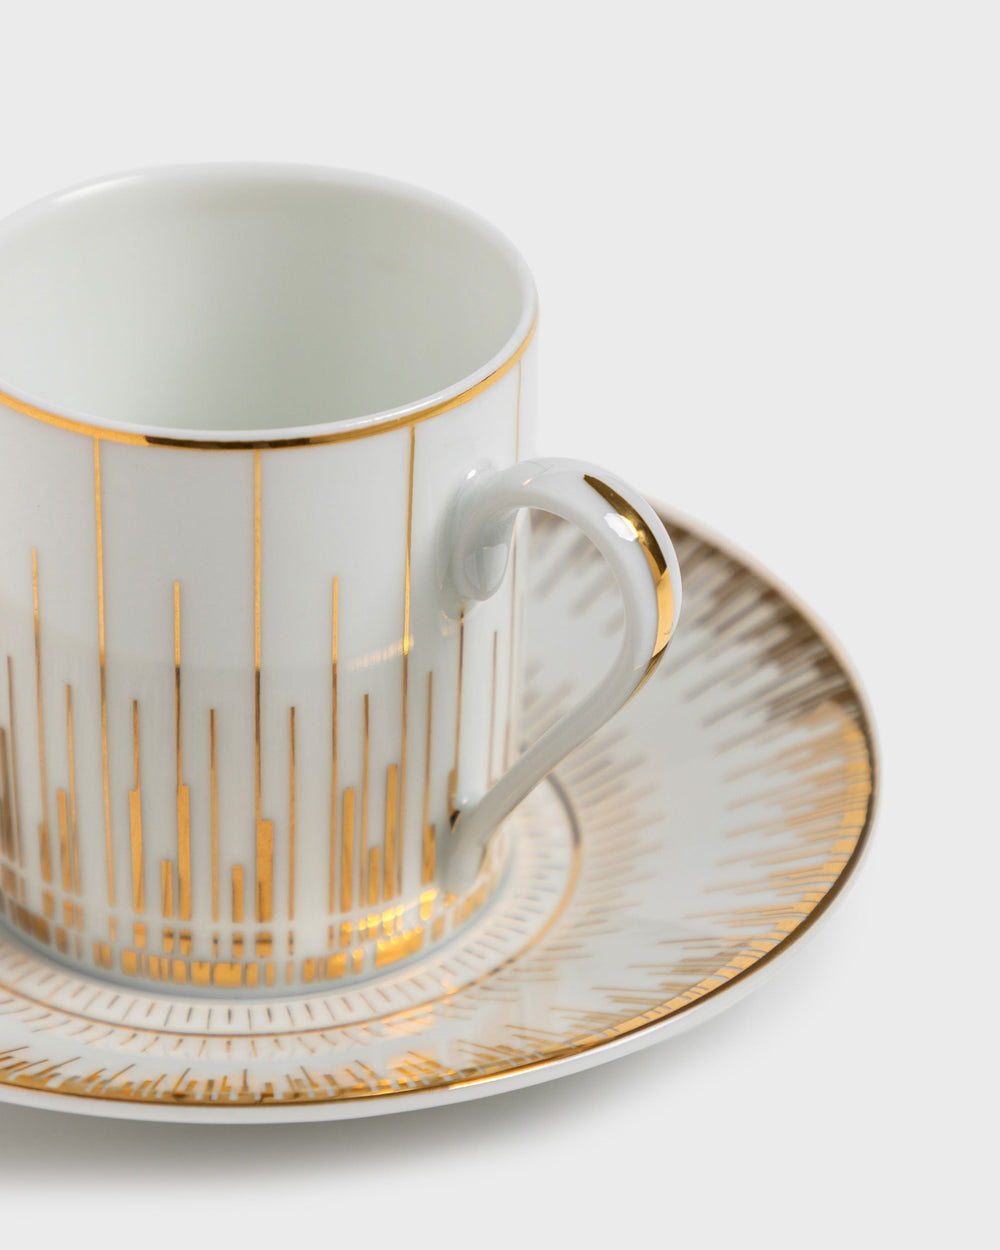 Tania Bulhoes Espresso Cup and Saucer Astro